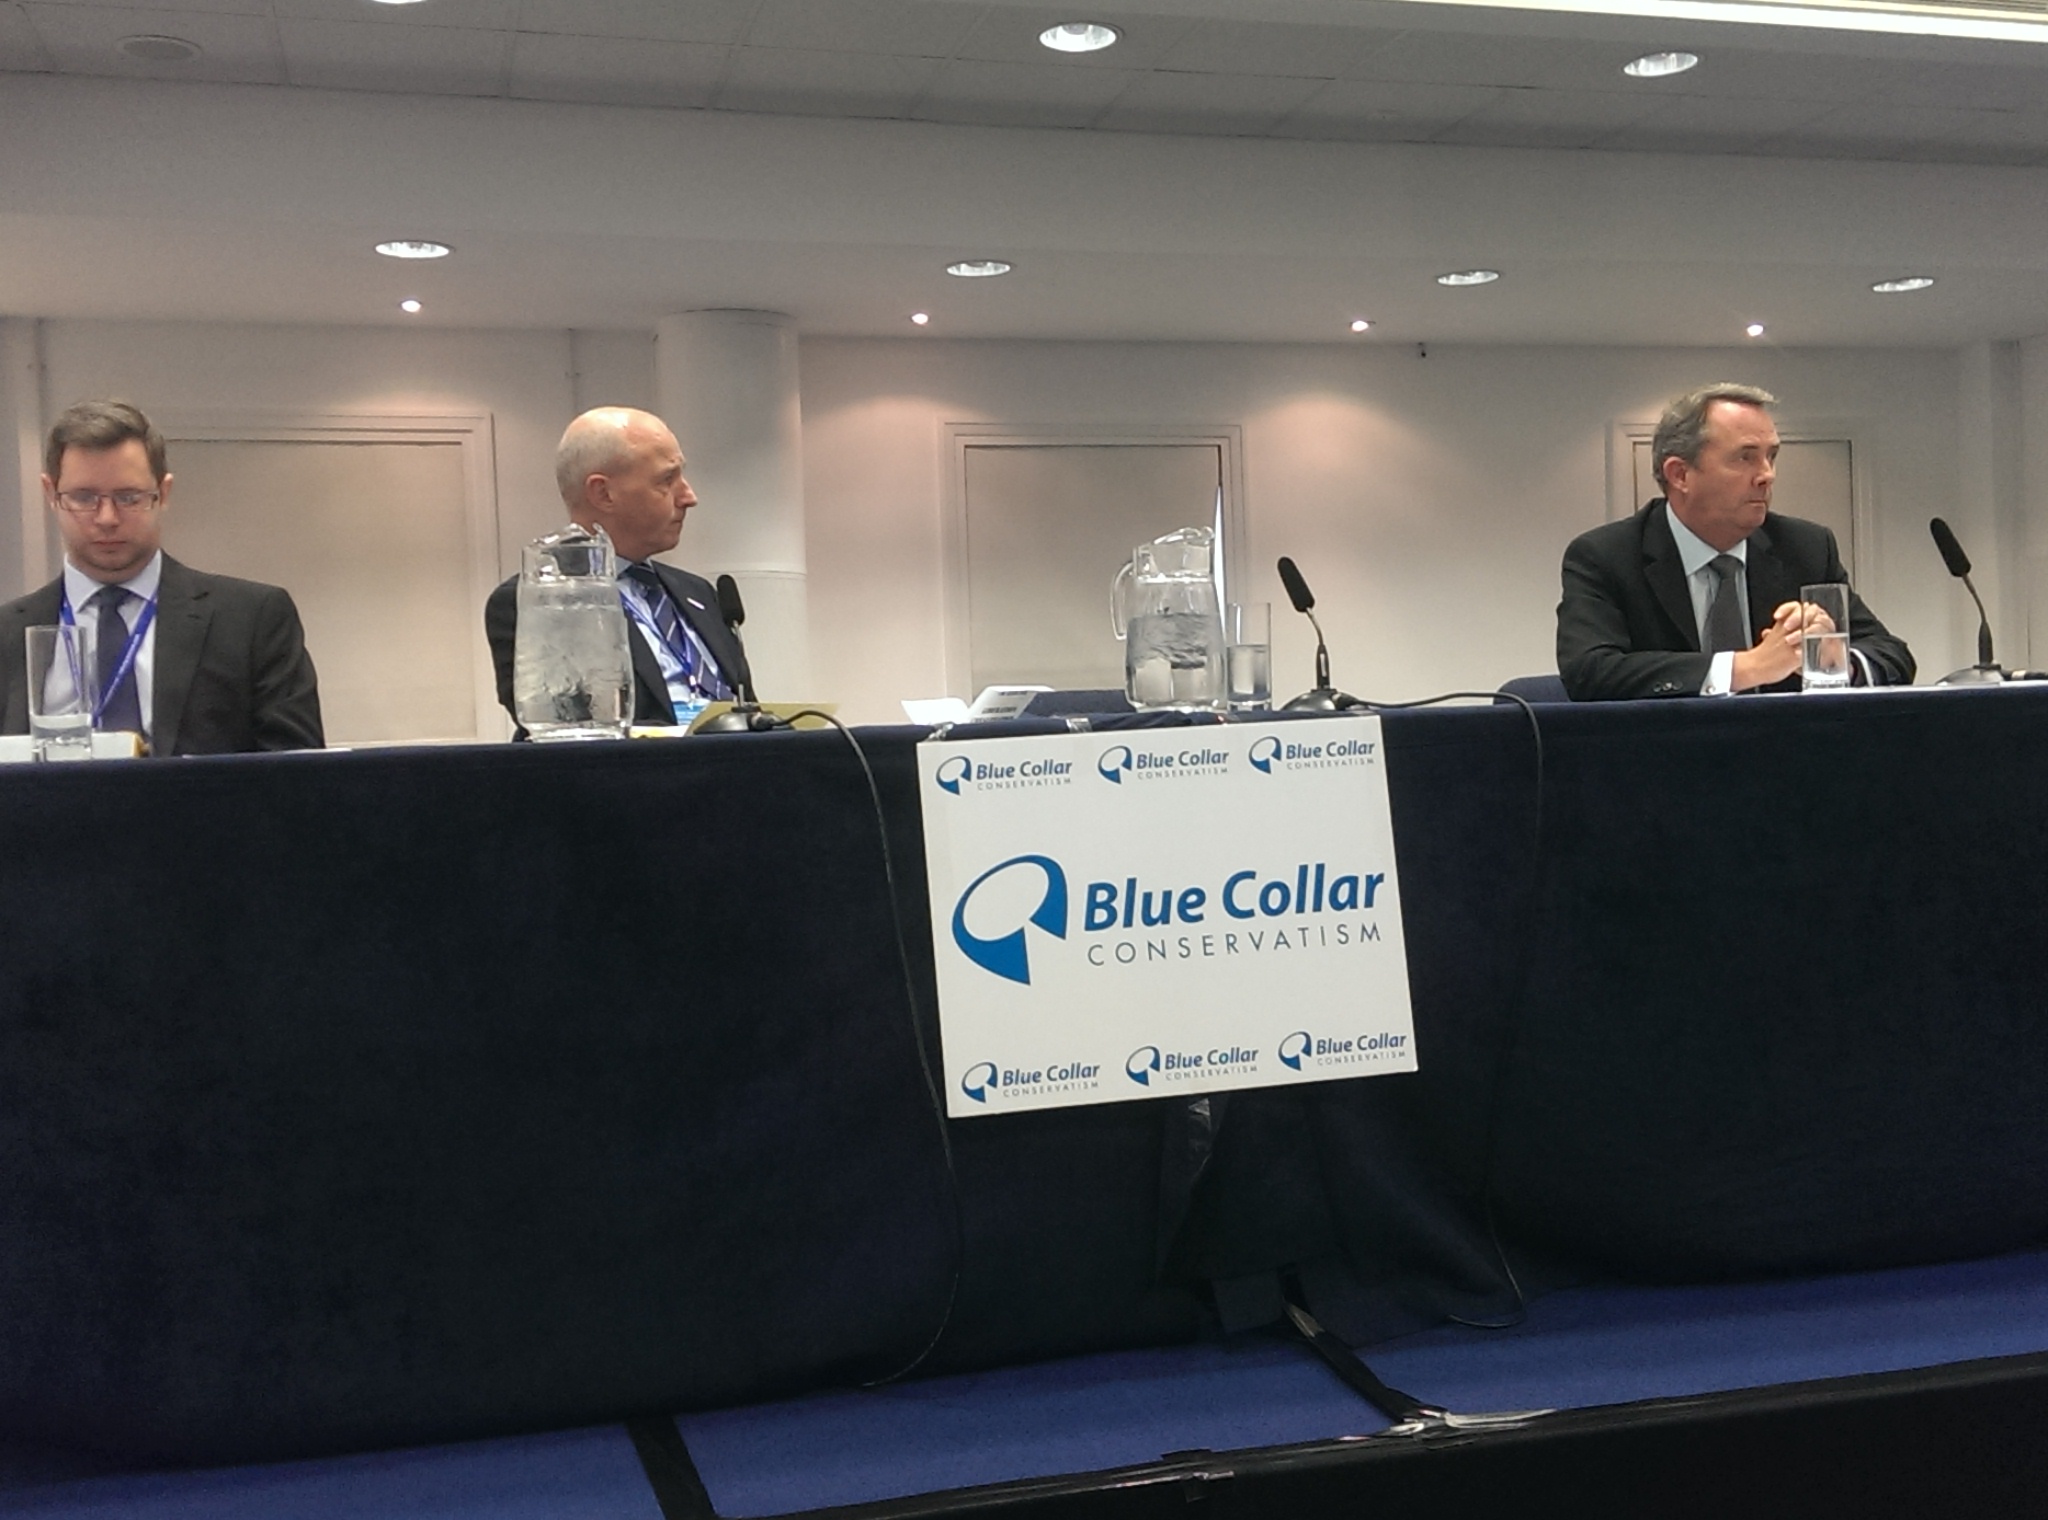 Liam Fox calls for ‘Liberation Conservatism’ at Blue Collar Conservatism event